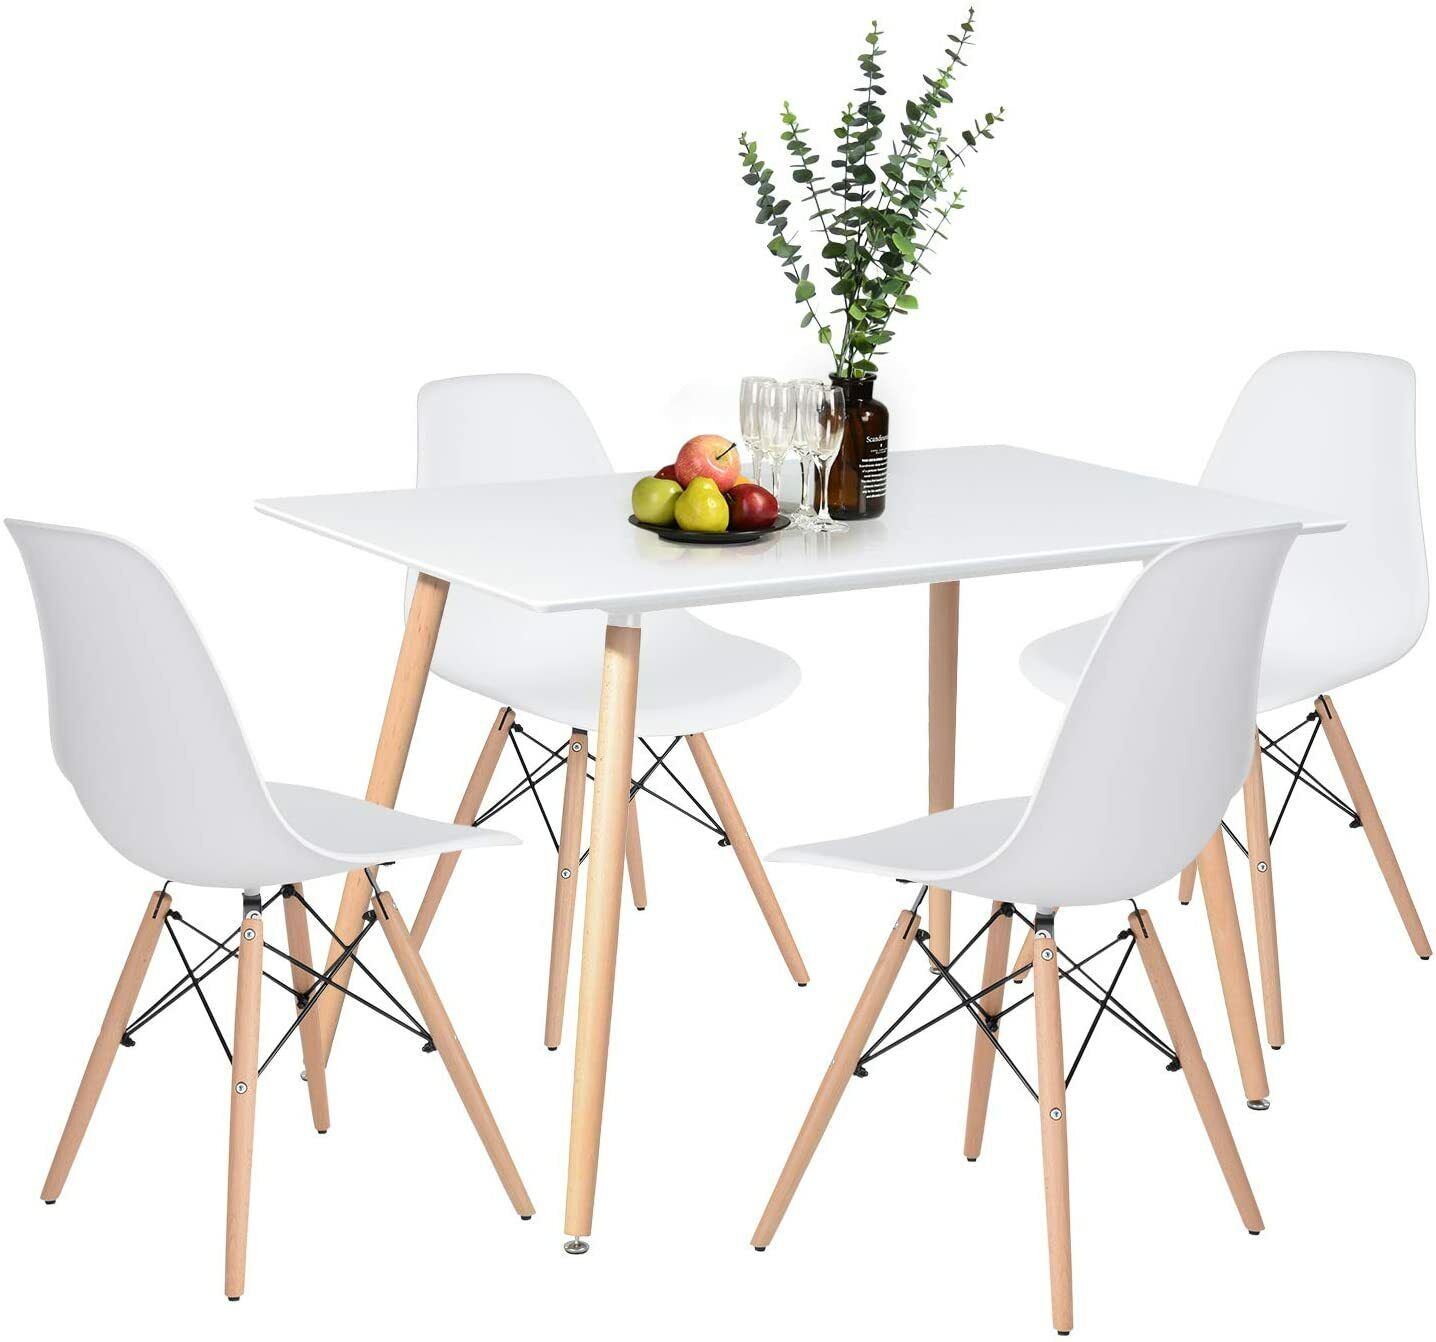 Set of 4 Dining Chair Plastic Chair for Kitchen Dining Bedroom Living Room White Fetines Does Not Apply - фотография #9